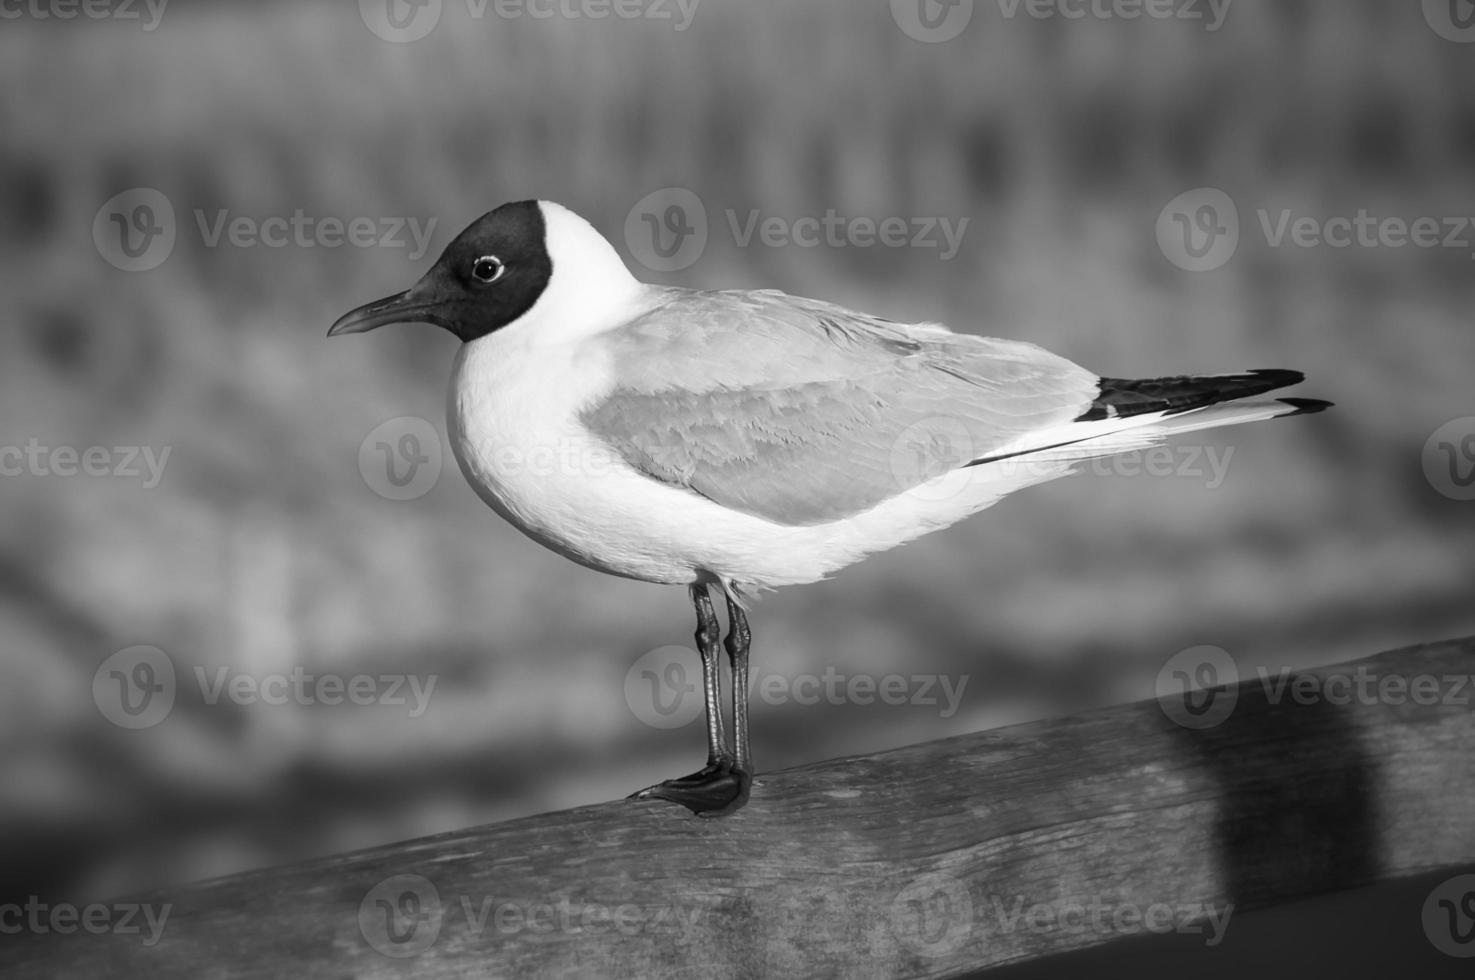 Laughing gull photographed in black and white, standing pier on the Baltic Sea photo